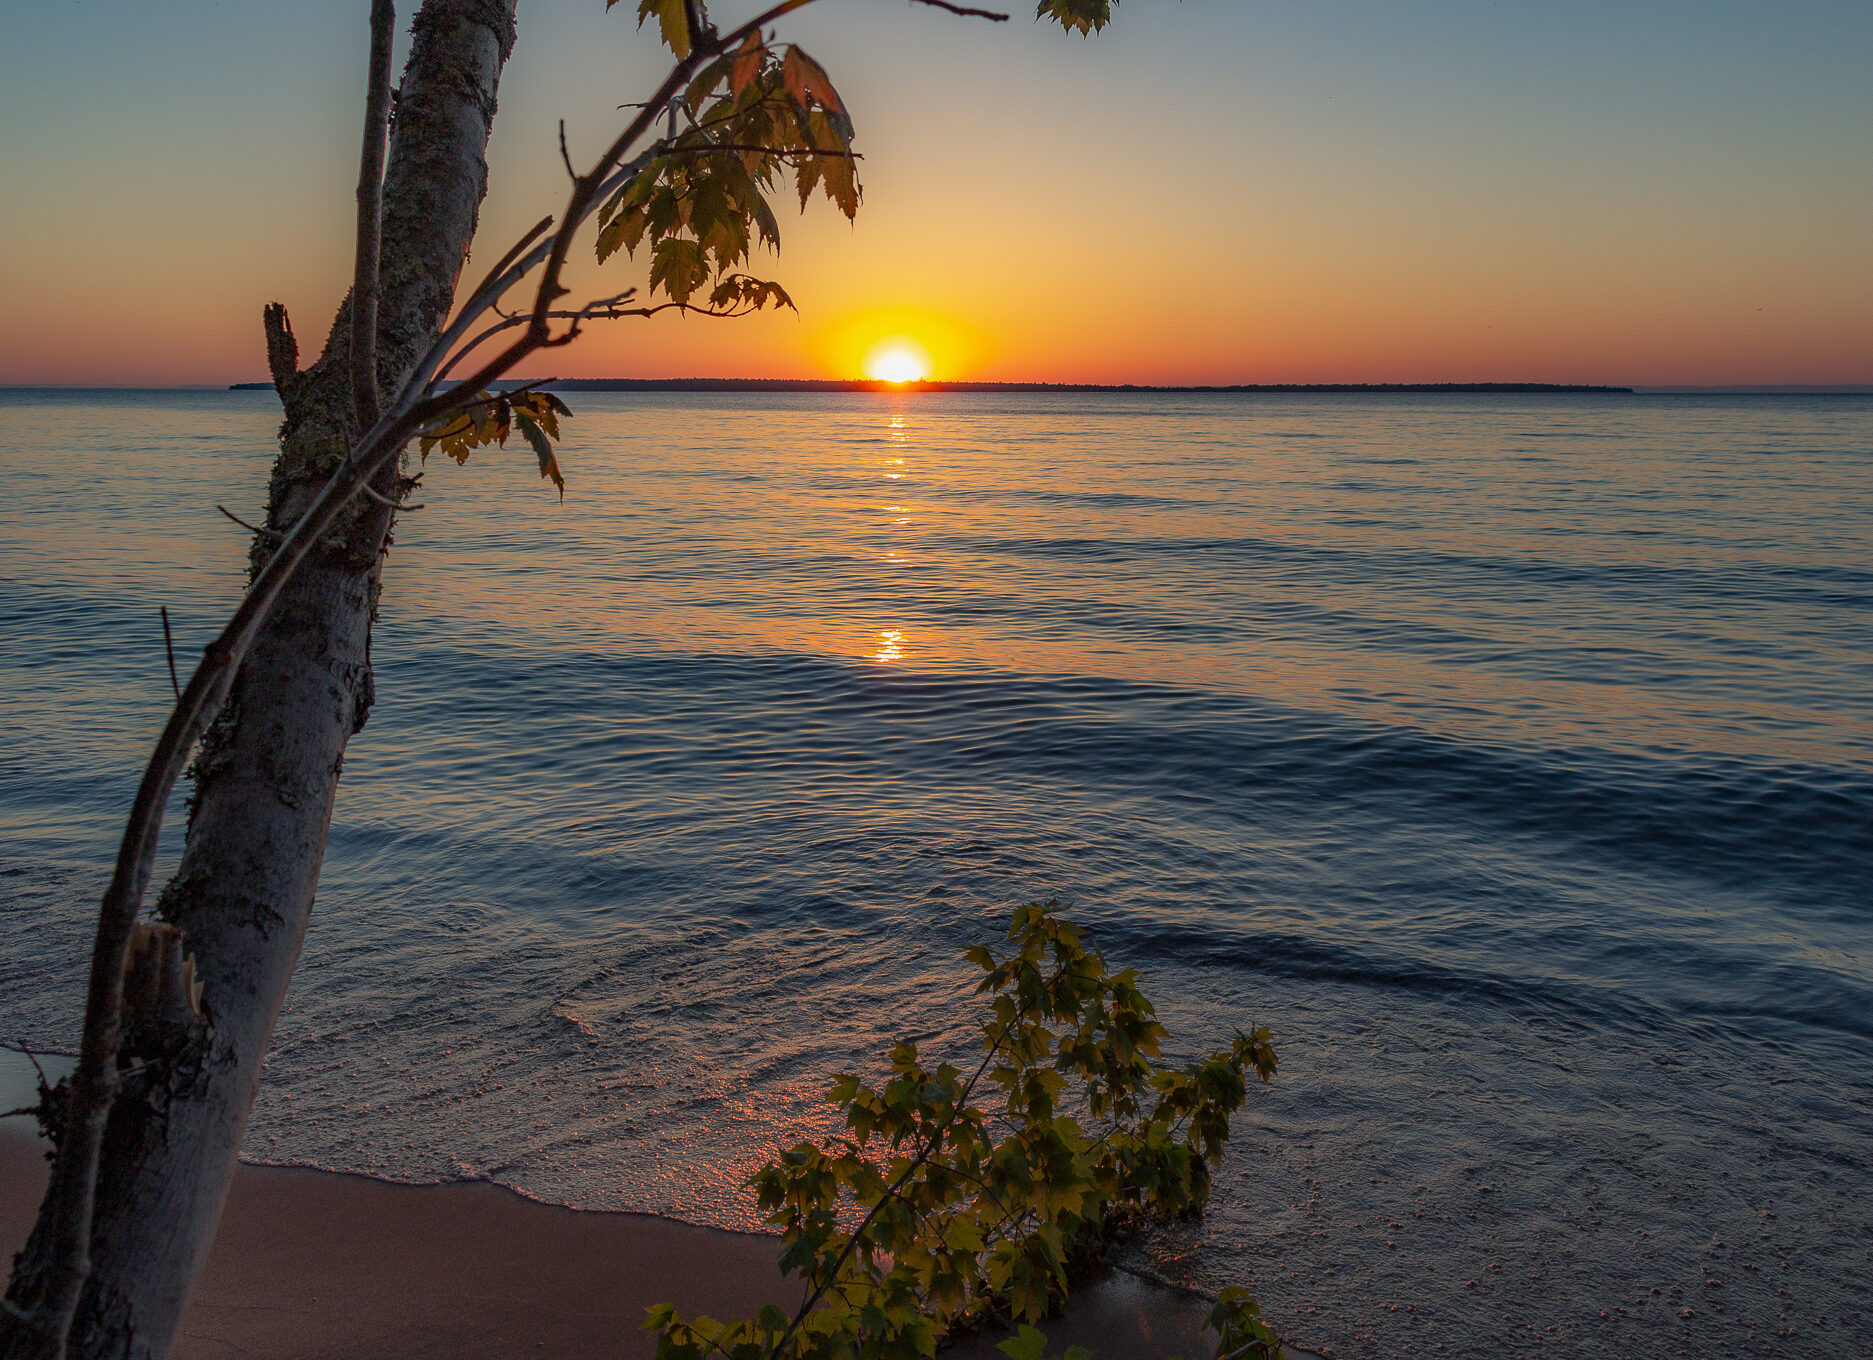 Views from Little Sand Bay, family beach campground on the great lakes